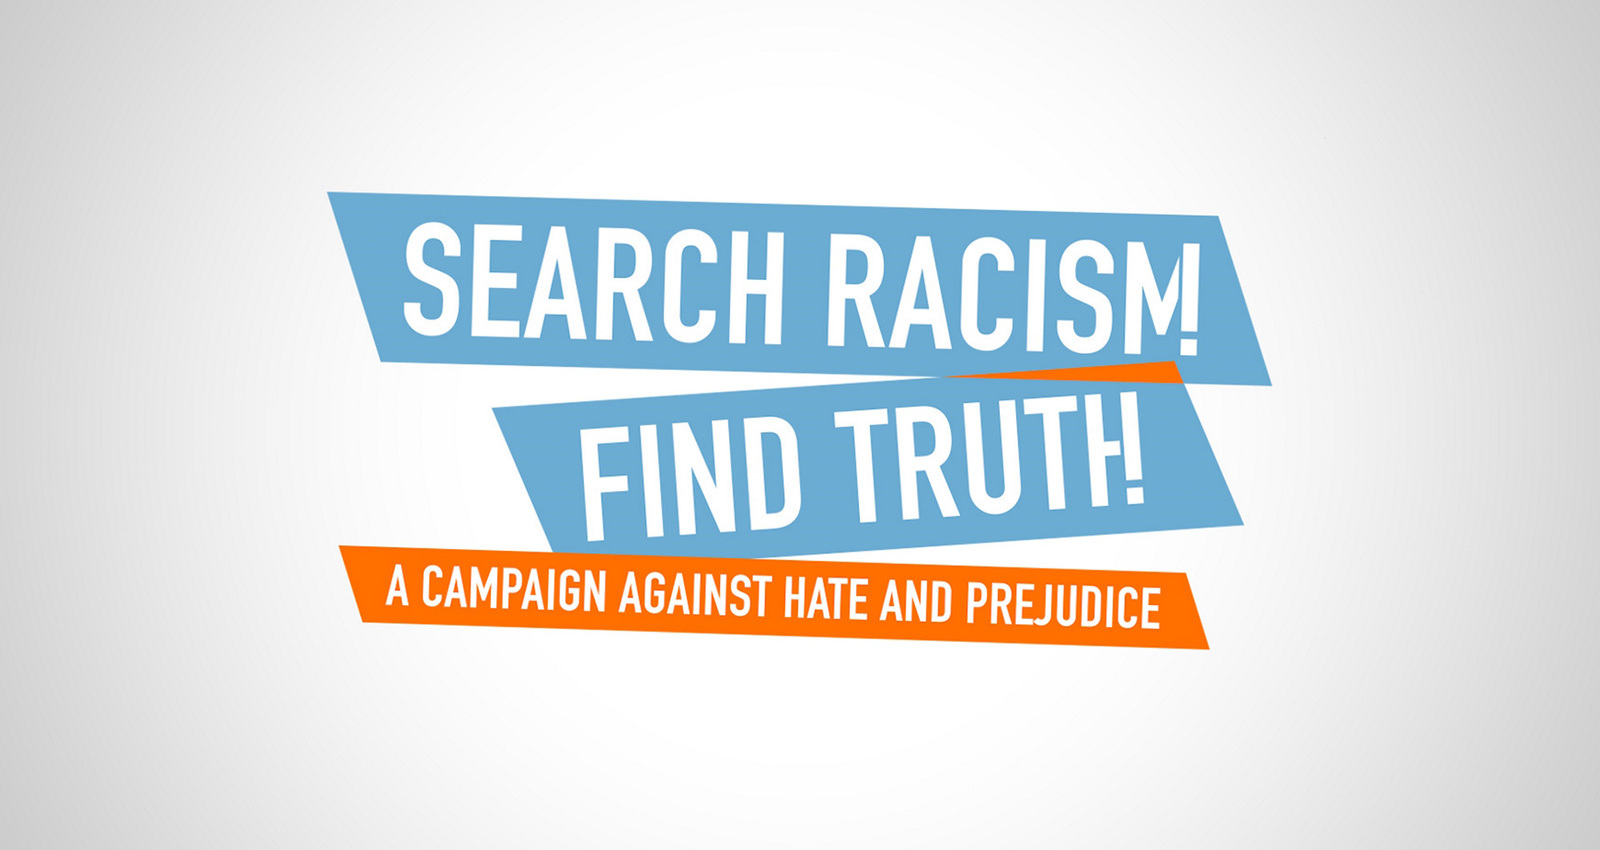 Search Racism. Find Truth.